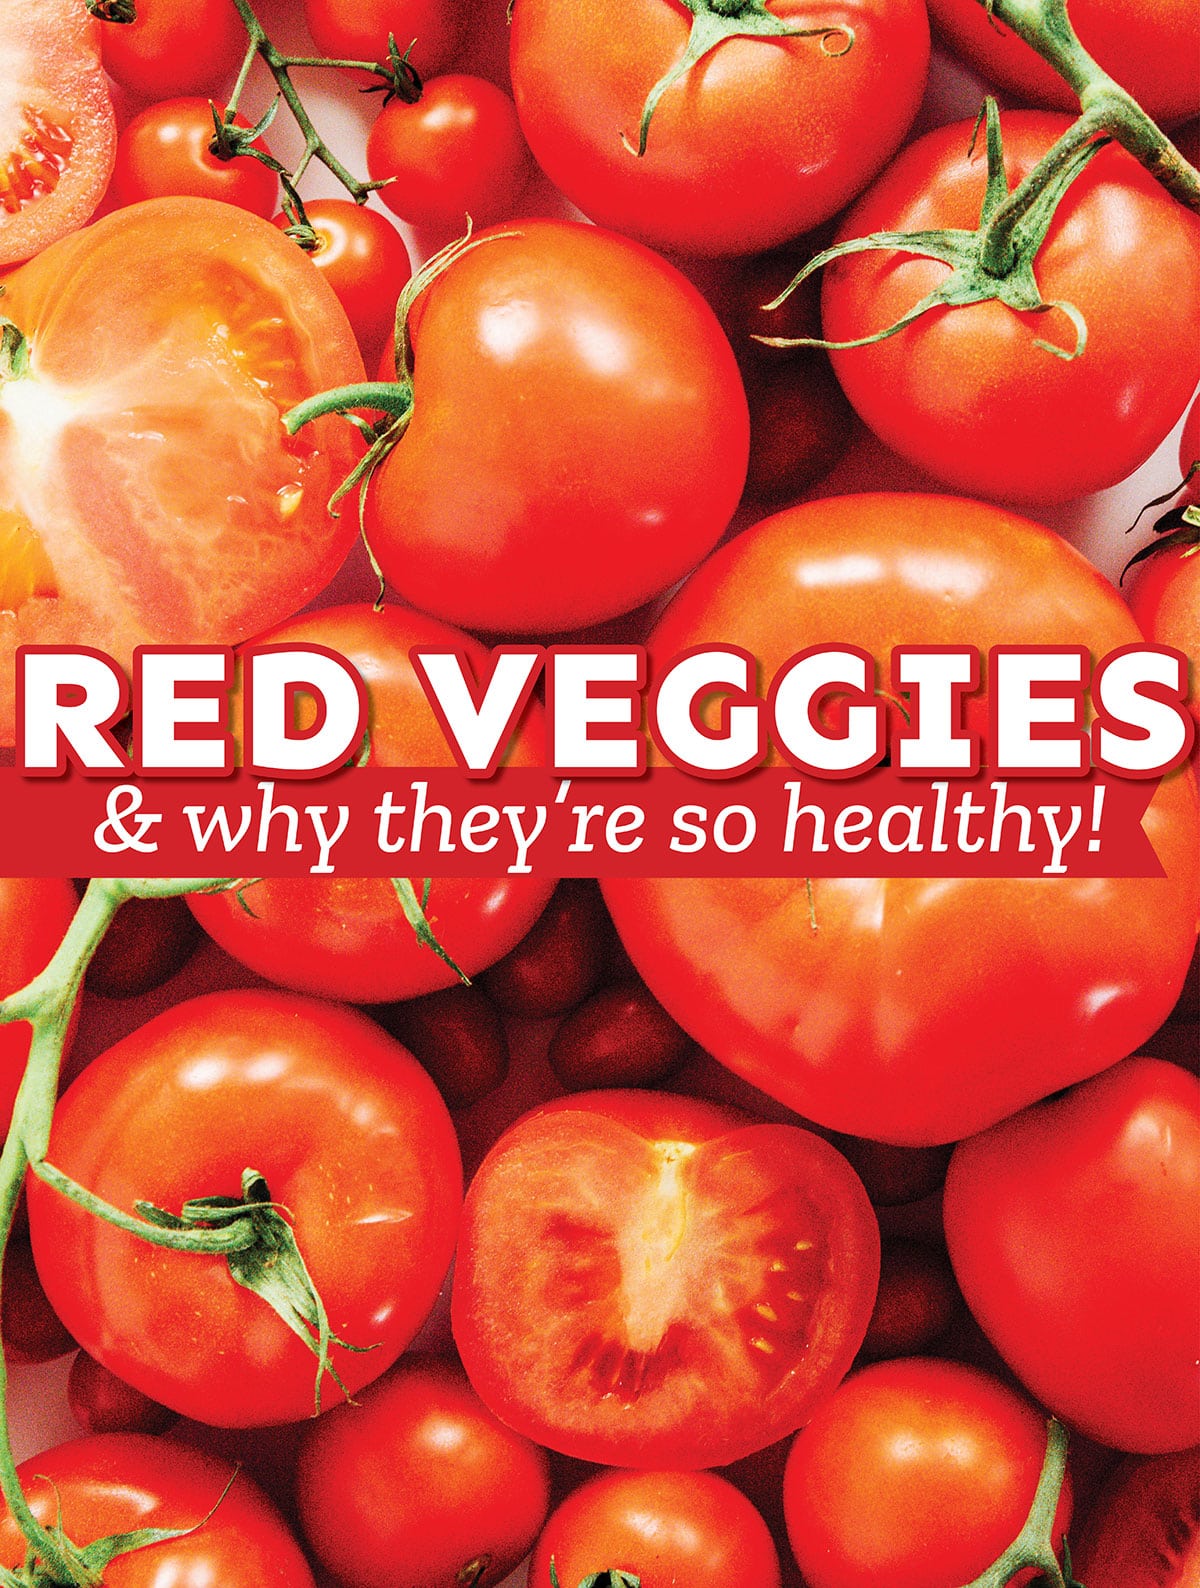 Collage that says "red vegetables".